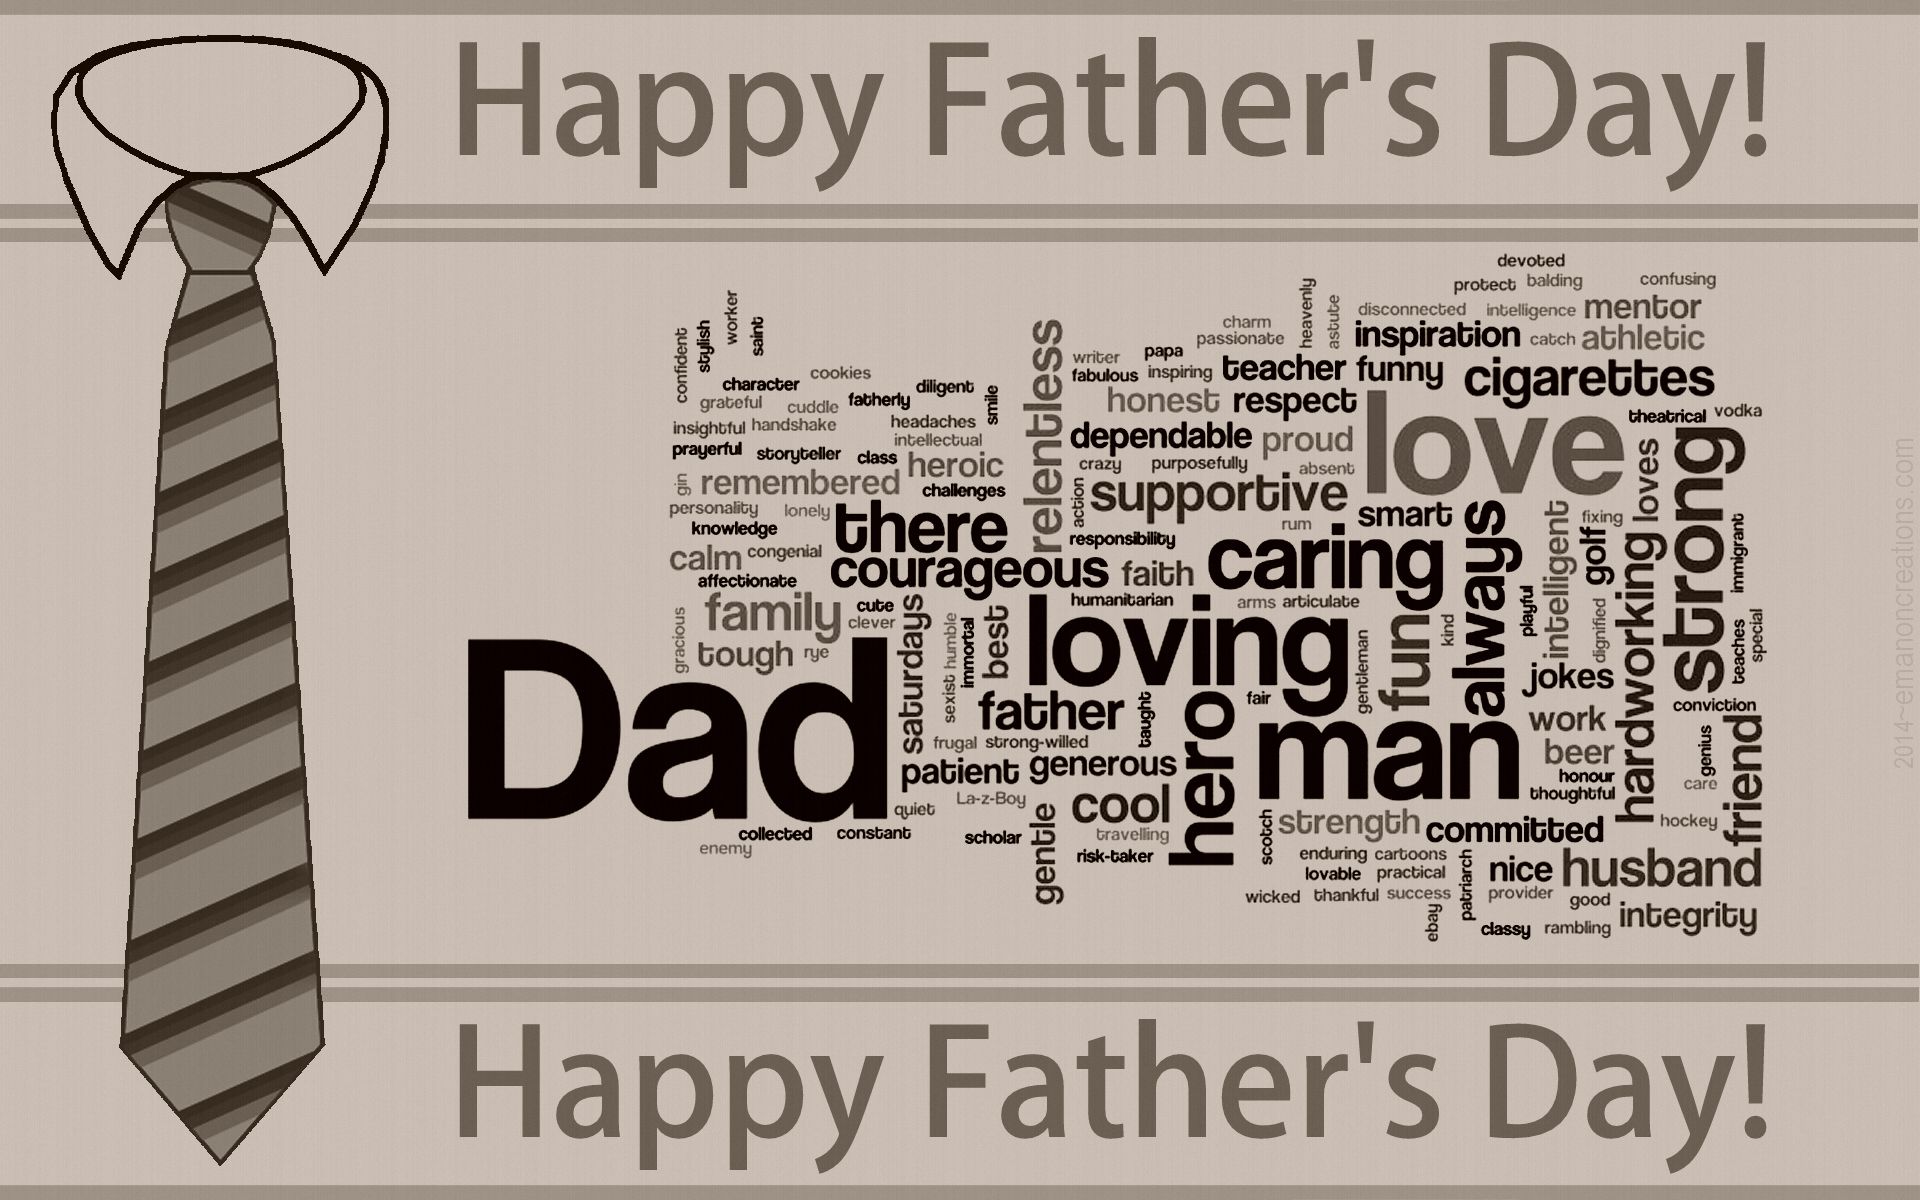 Happy Fathers Day Image 2018: Fathers Day Picture, Photo, Pics, HD Wallpaper. Fathers Day. Happy fathers day wallpaper, Fathers day quotes, Happy fathers day